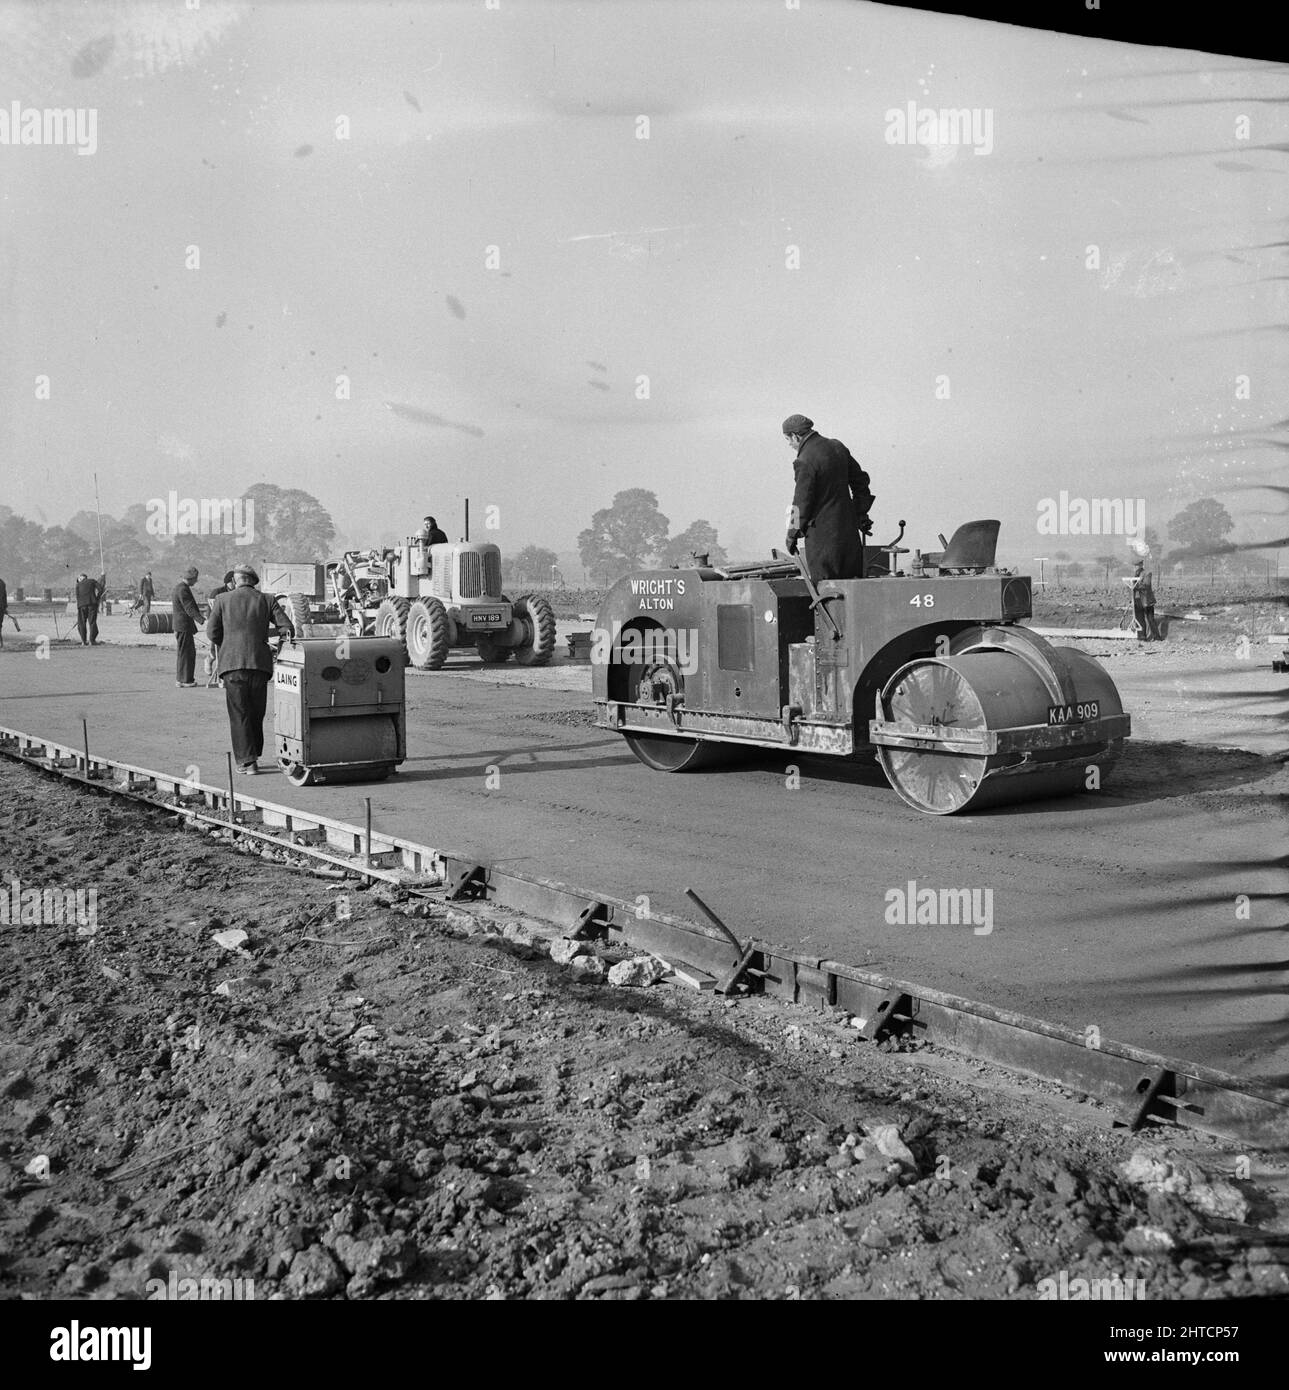 RAF Gaydon, Gaydon, Stratford-on-Avon, Warwickshire, 11/10/1952. Work underway on the construction of a new runway at Gaydon Airfield, showing a Wright's roller and a pedestrian roller compacting the concrete working course. Work began on the construction of a runway at Gaydon Airfield in early 1952. As part of the project, a former runway, largely abandoned following the Second World War, was superseded by a newly constructed runway nearly 1 3/4 miles long and 200 feet wide. Also built were access tracks and a taxi-track. The runway was constructed on 8 inches of hardcore, with four inches of Stock Photo